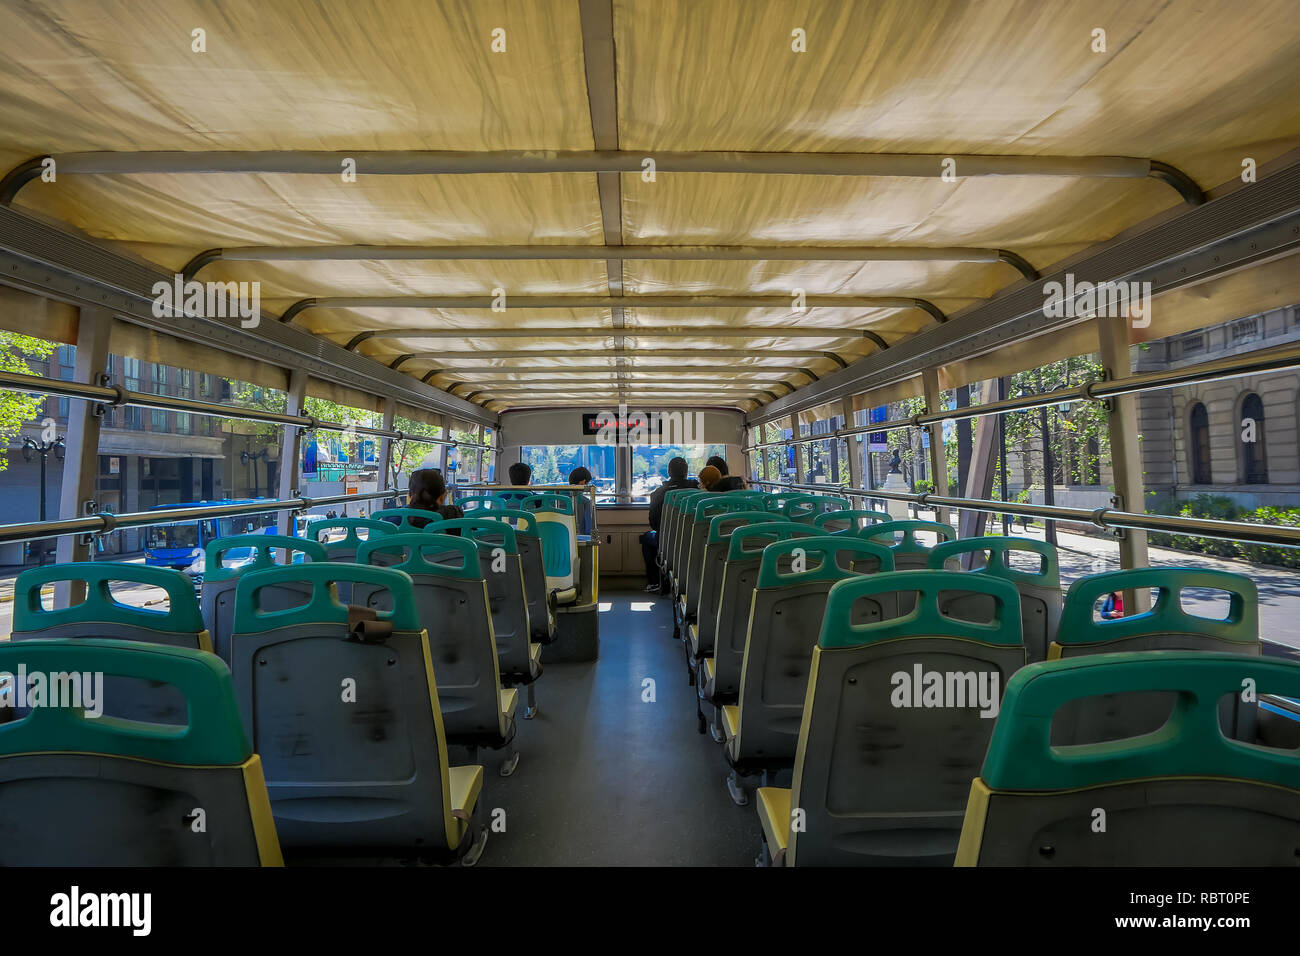 SANTIAGO, CHILE - OCTOBER 16, 2018: Indoor view of details of chairs located inside of public transport bus located in the city of Santiago of Chile Stock Photo